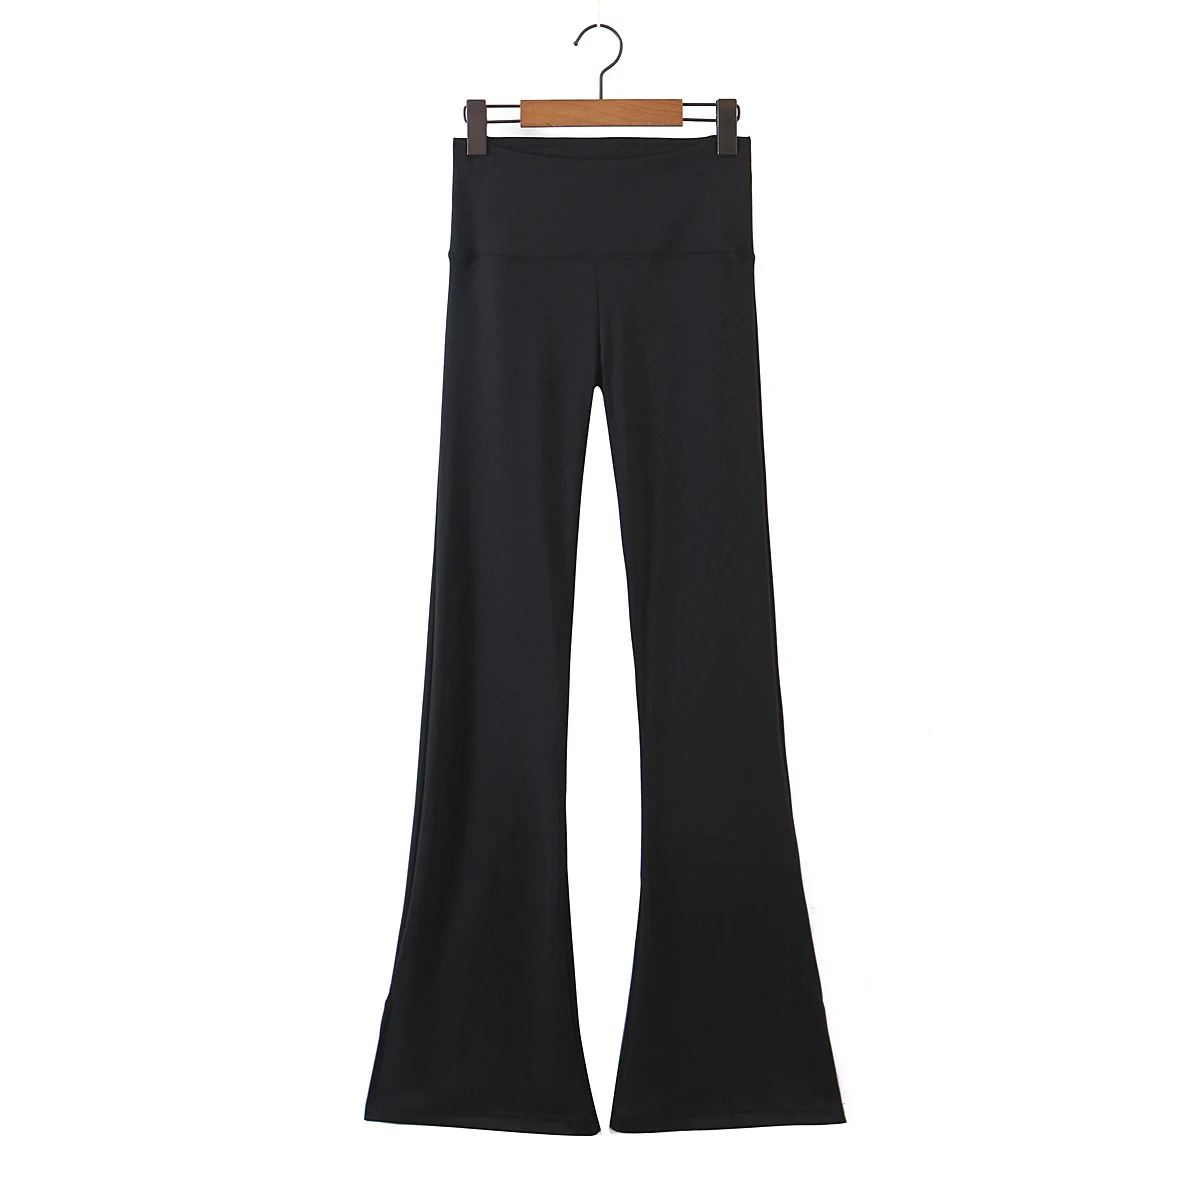 Women’s Basic Black Stretchy Flare Tights Pants Full Length Trousers With Side Slit Detail